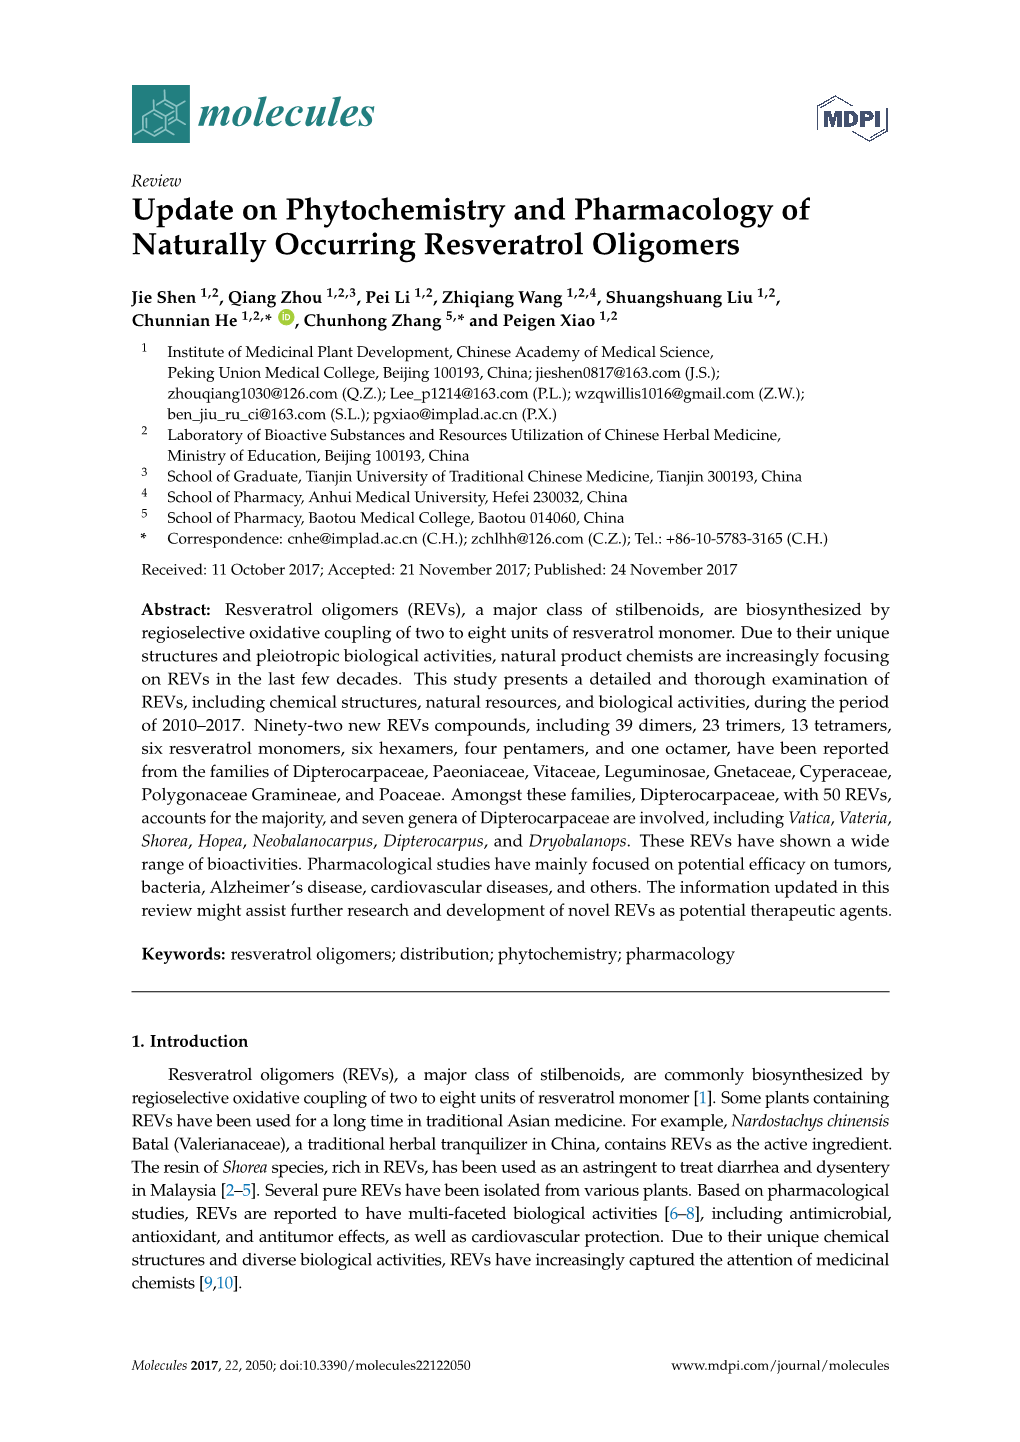 Update on Phytochemistry and Pharmacology of Naturally Occurring Resveratrol Oligomers